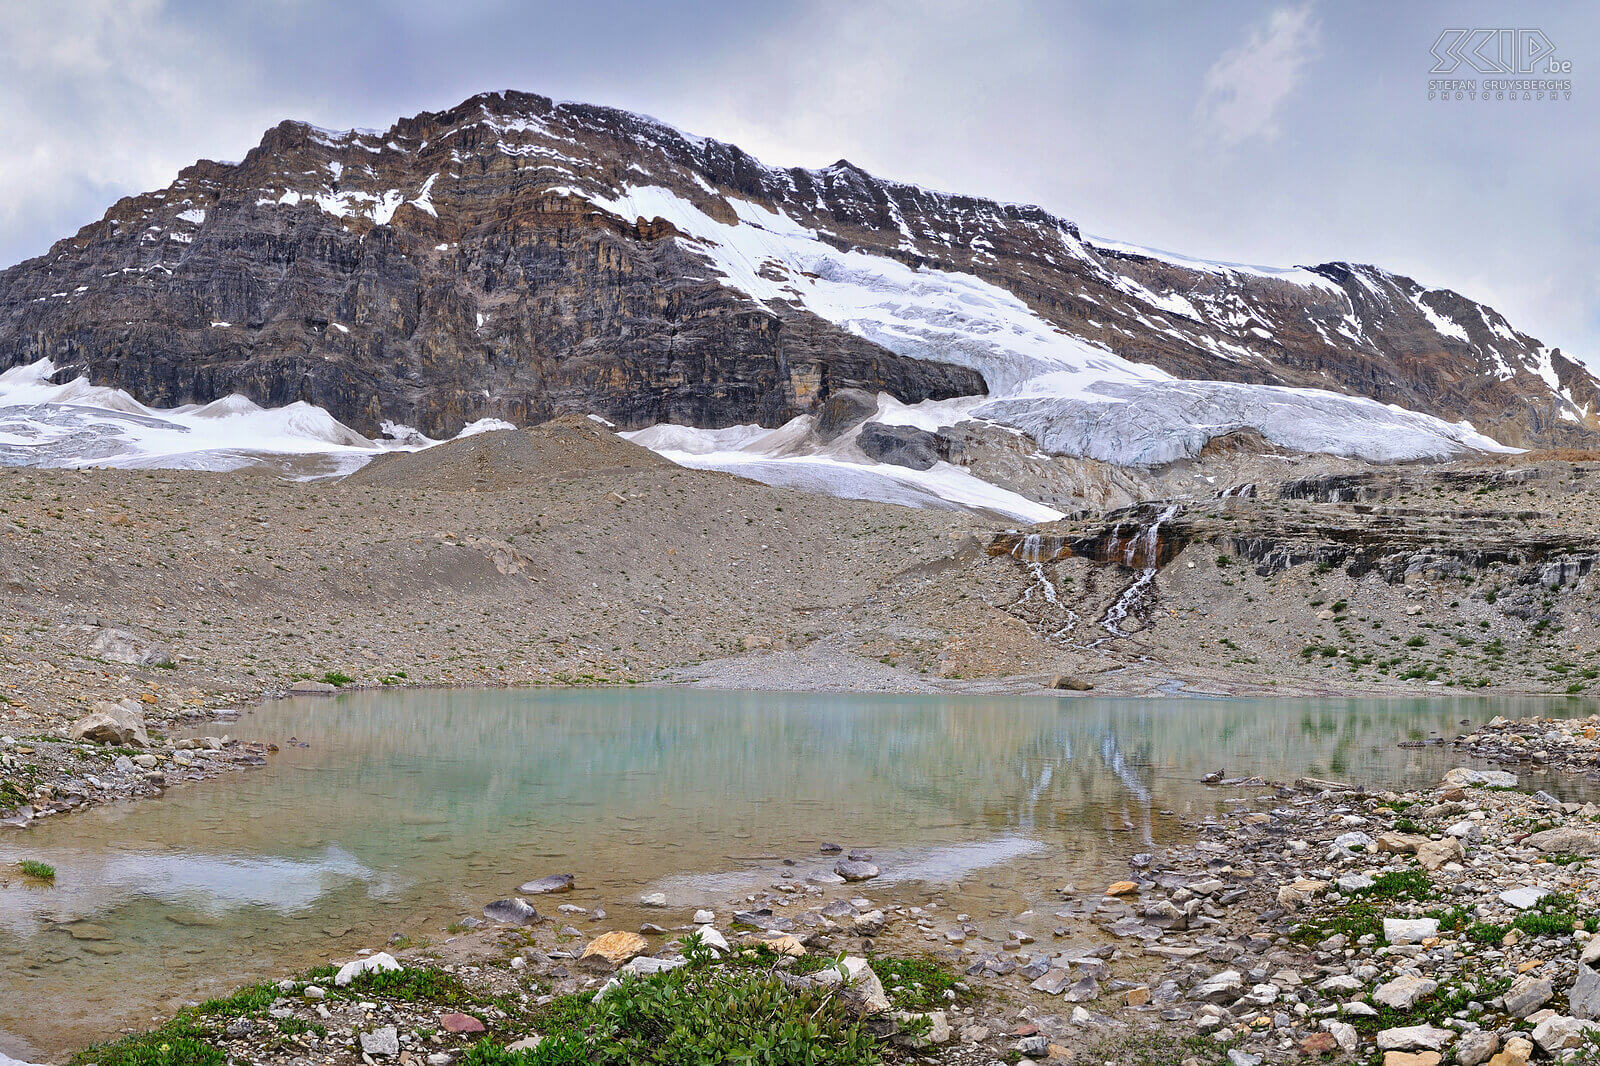 Yoho NP - Iceline Trail - Celeste Lake In Yoho NP we hiked the Iceline trail (20km) en we passed the lower edges of the glaciers with small falls of melting water.  Stefan Cruysberghs